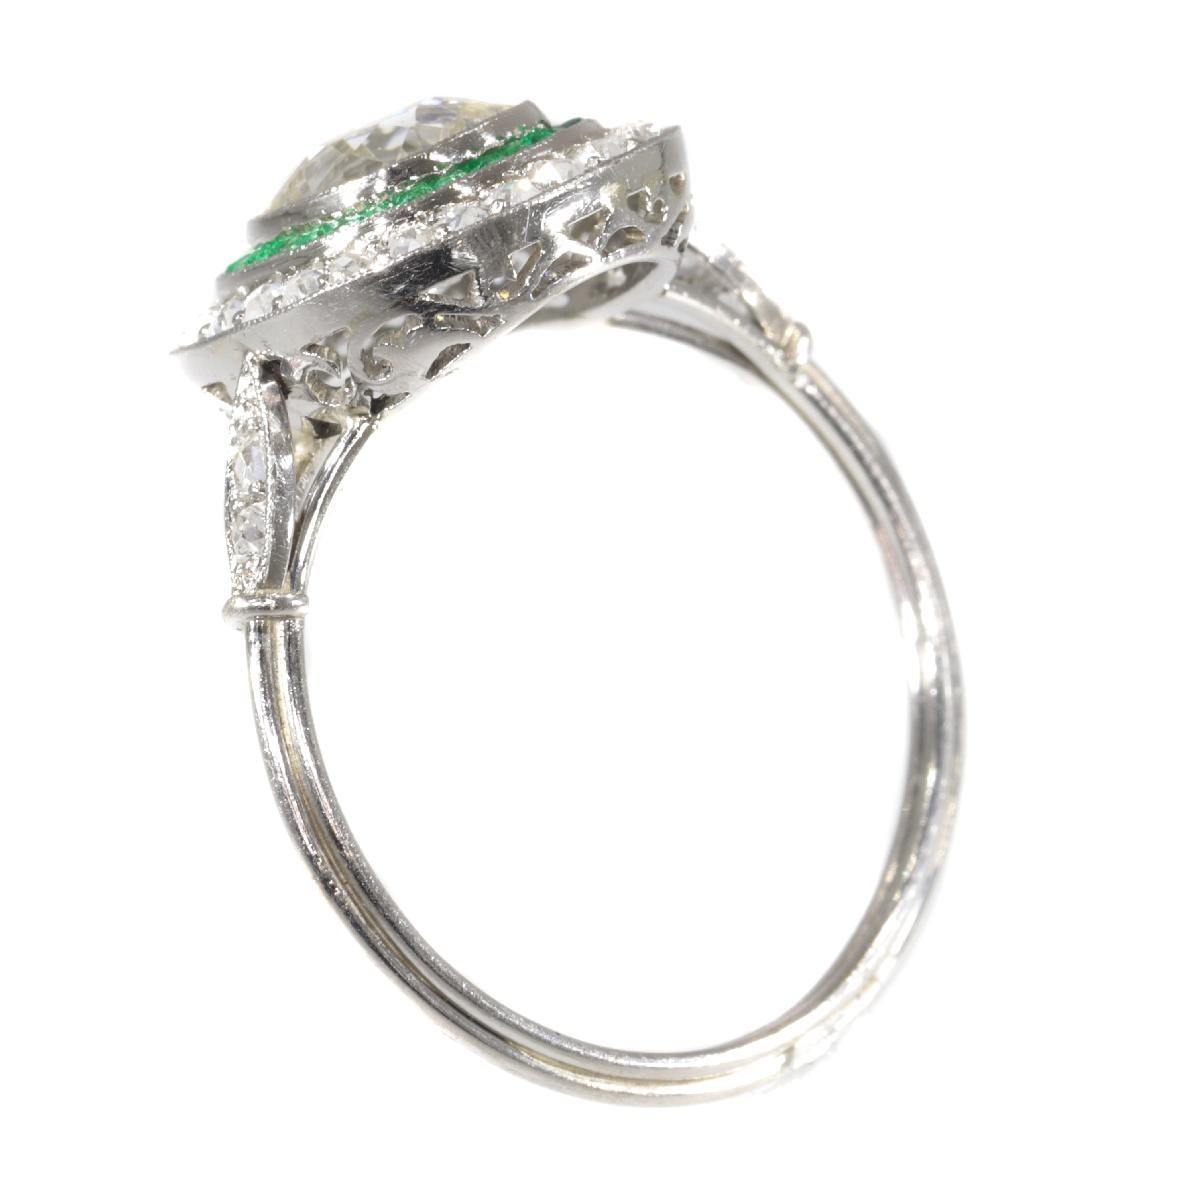 Vintage Art Deco Style Platinum Diamond and Emerald Engagement Ring, 1930s For Sale 2